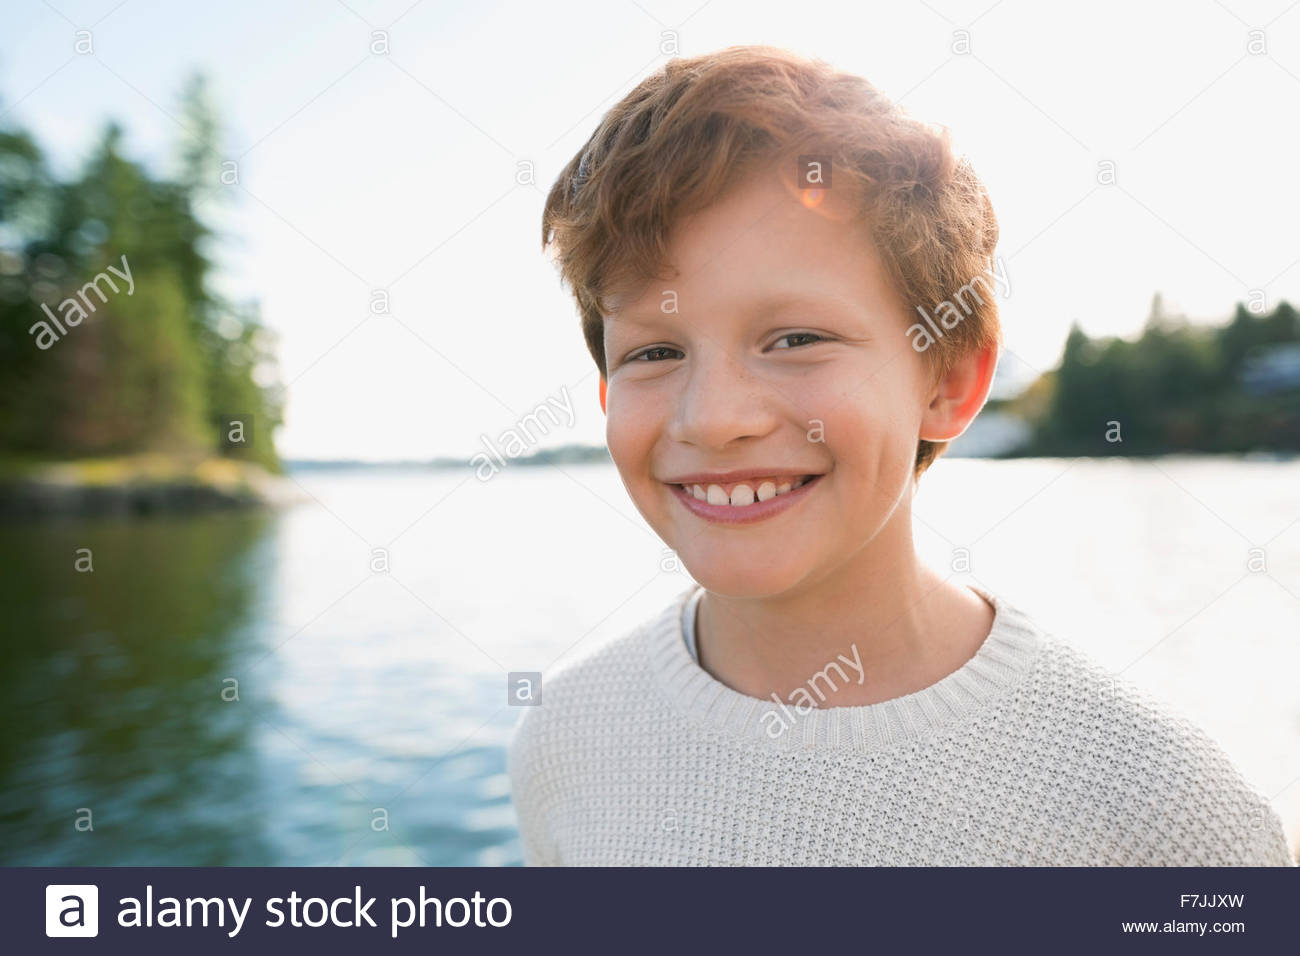 Portrait of smiling boy with red hair at lakeside Banque D'Images